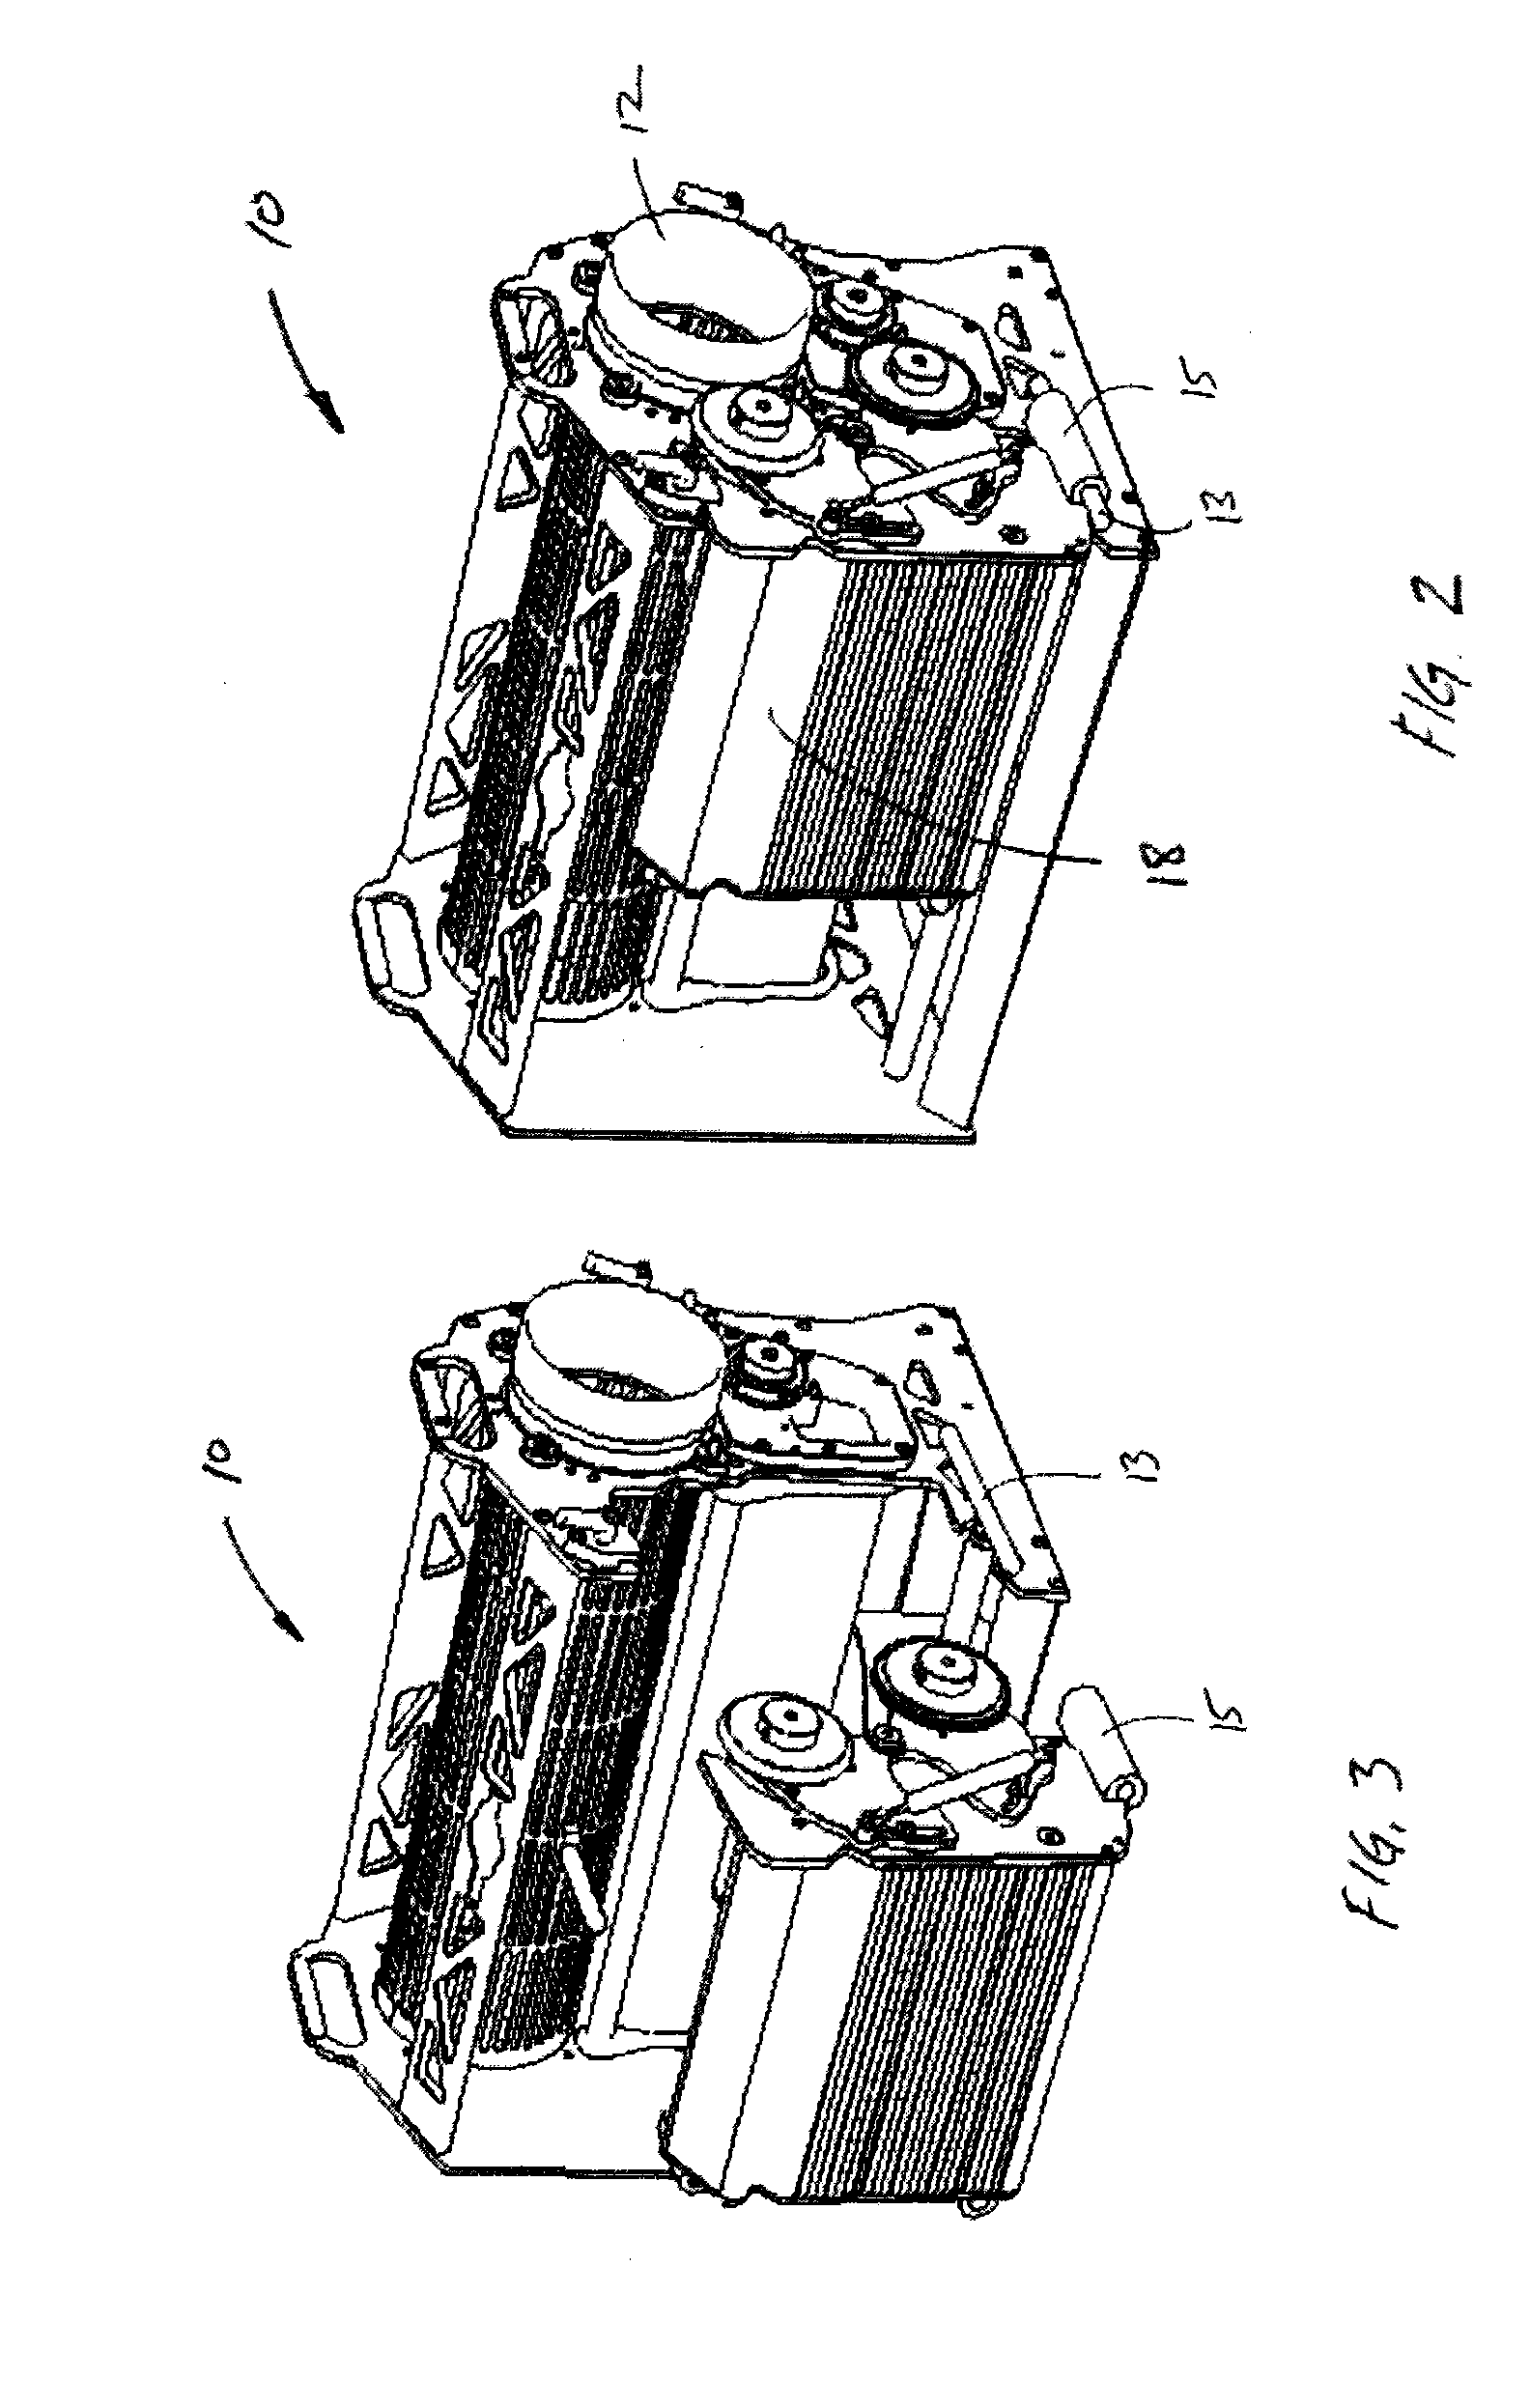 Removable motor housing for a plant material trimming device